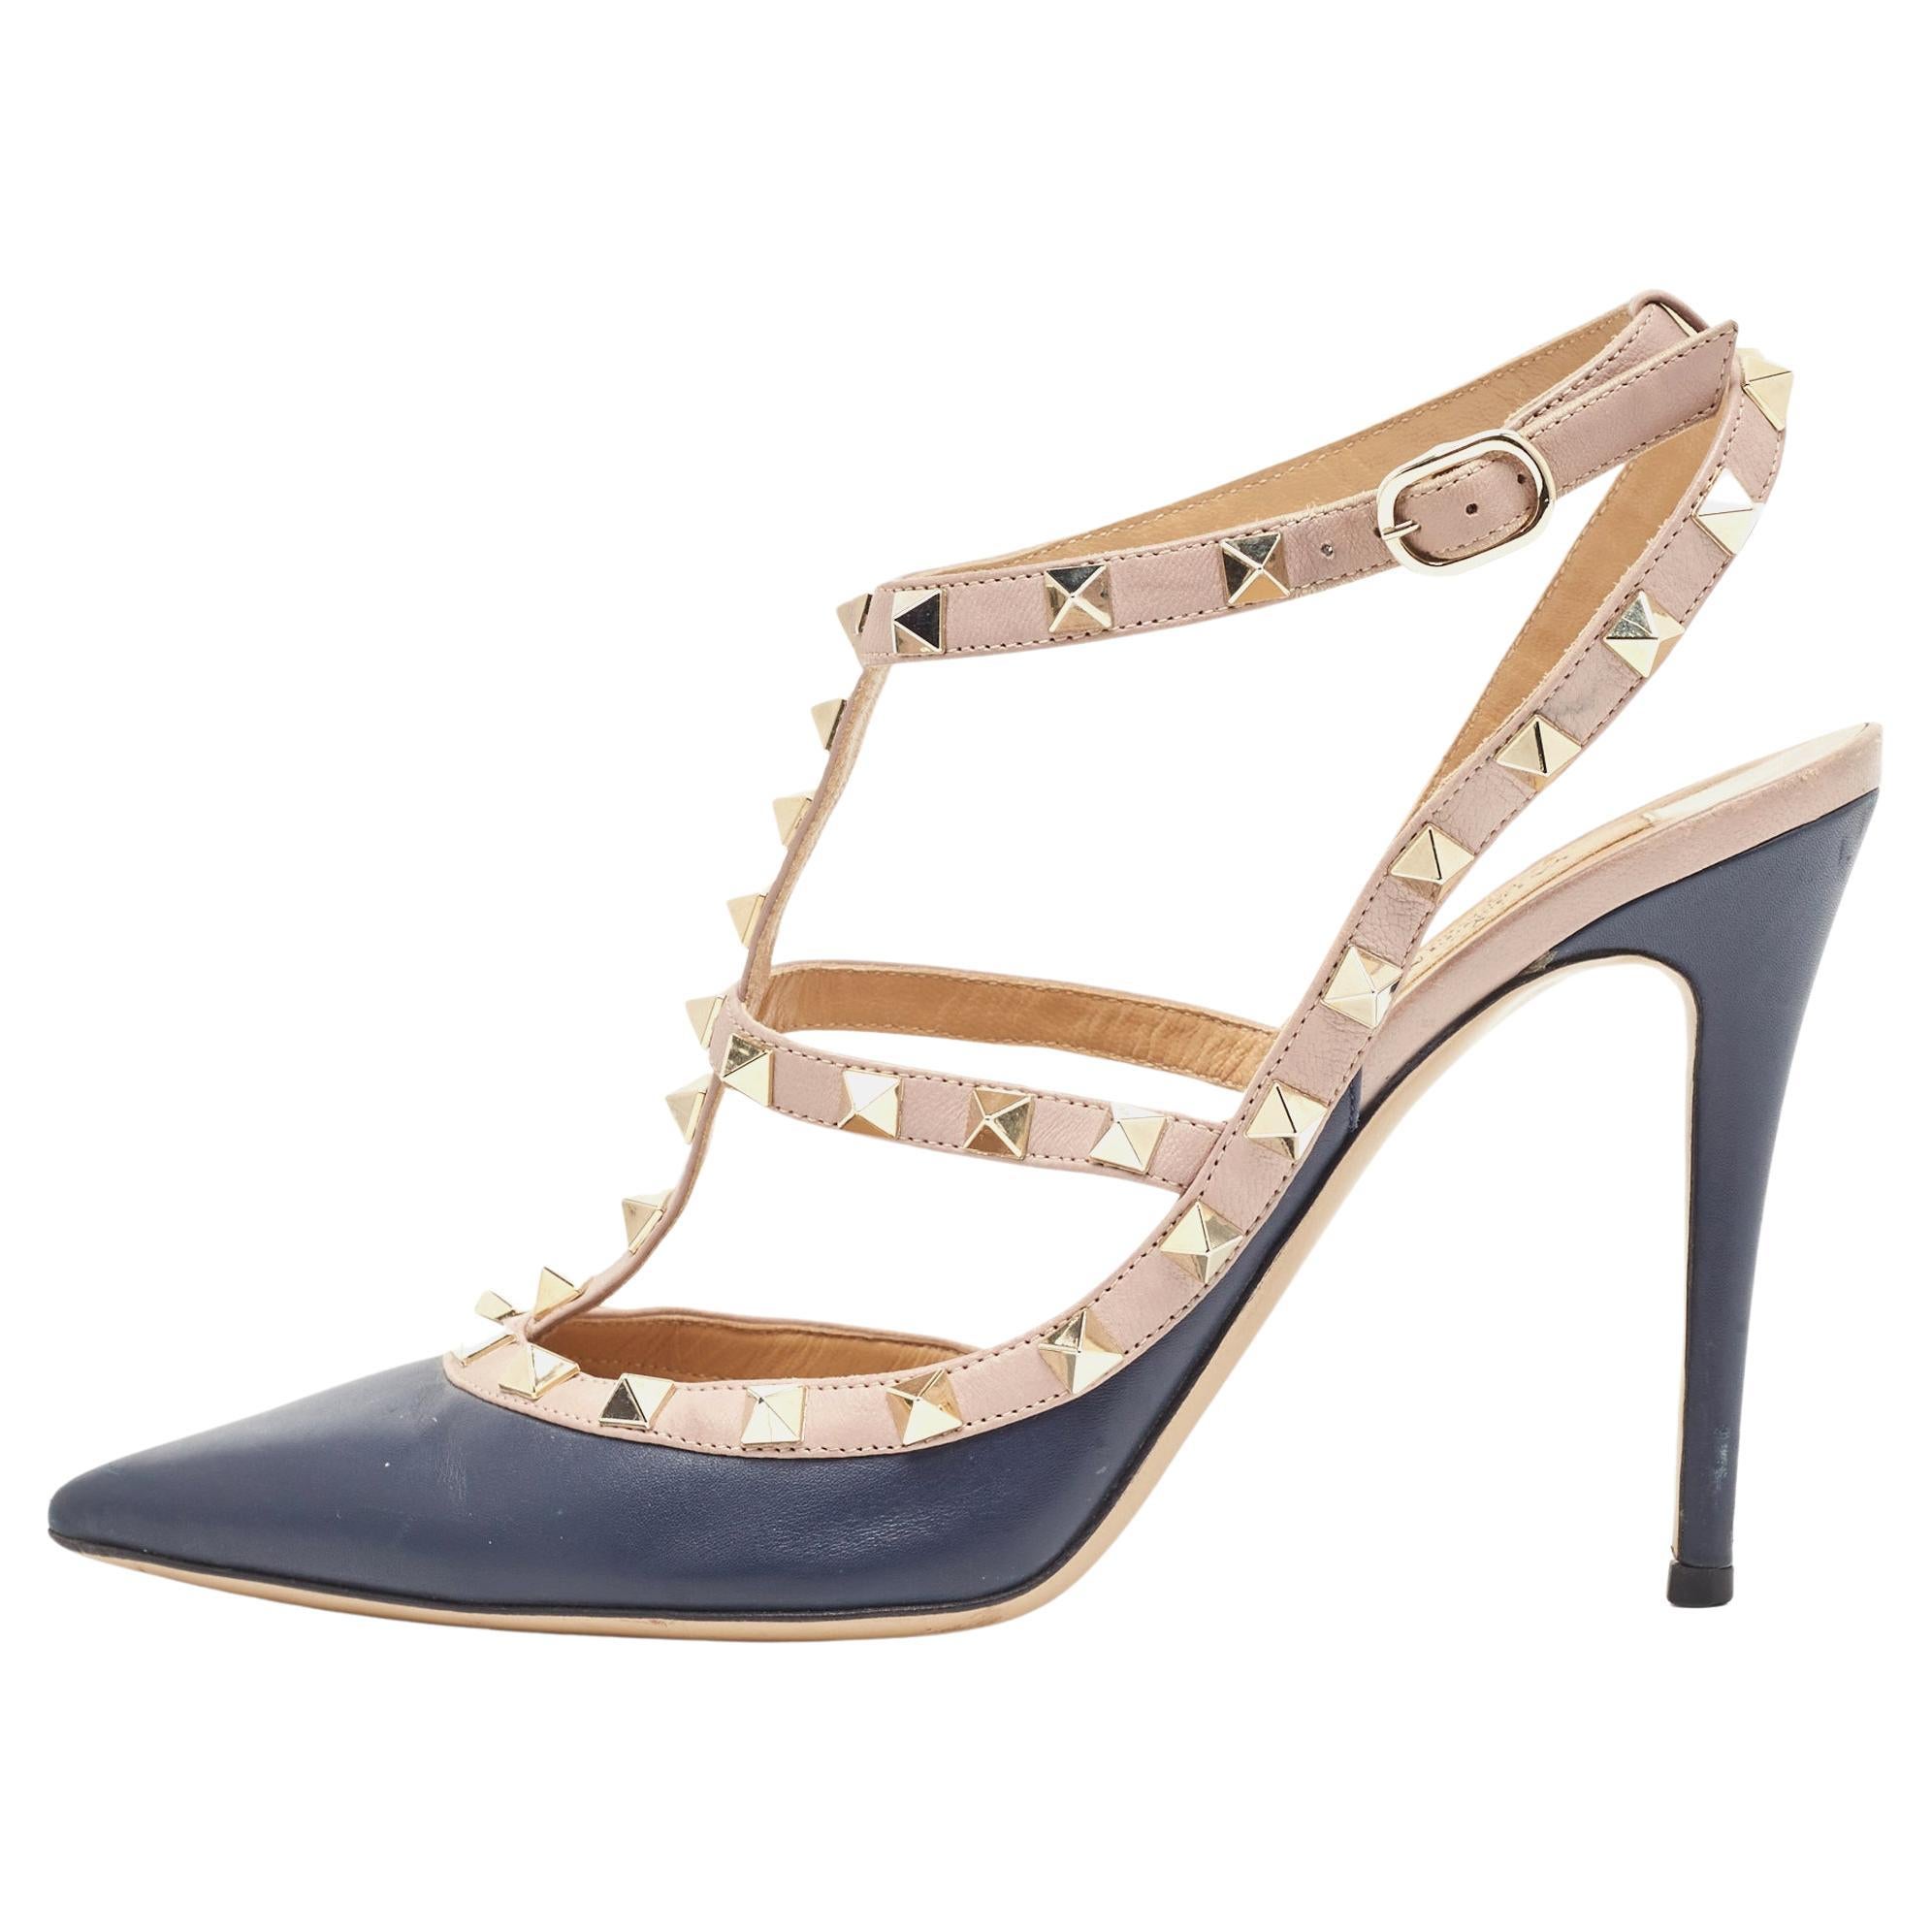 939689Valentino Navy Blue/Dusty Pink Leather Rockstud Ankle Strap Pumps Size 39. For Sale